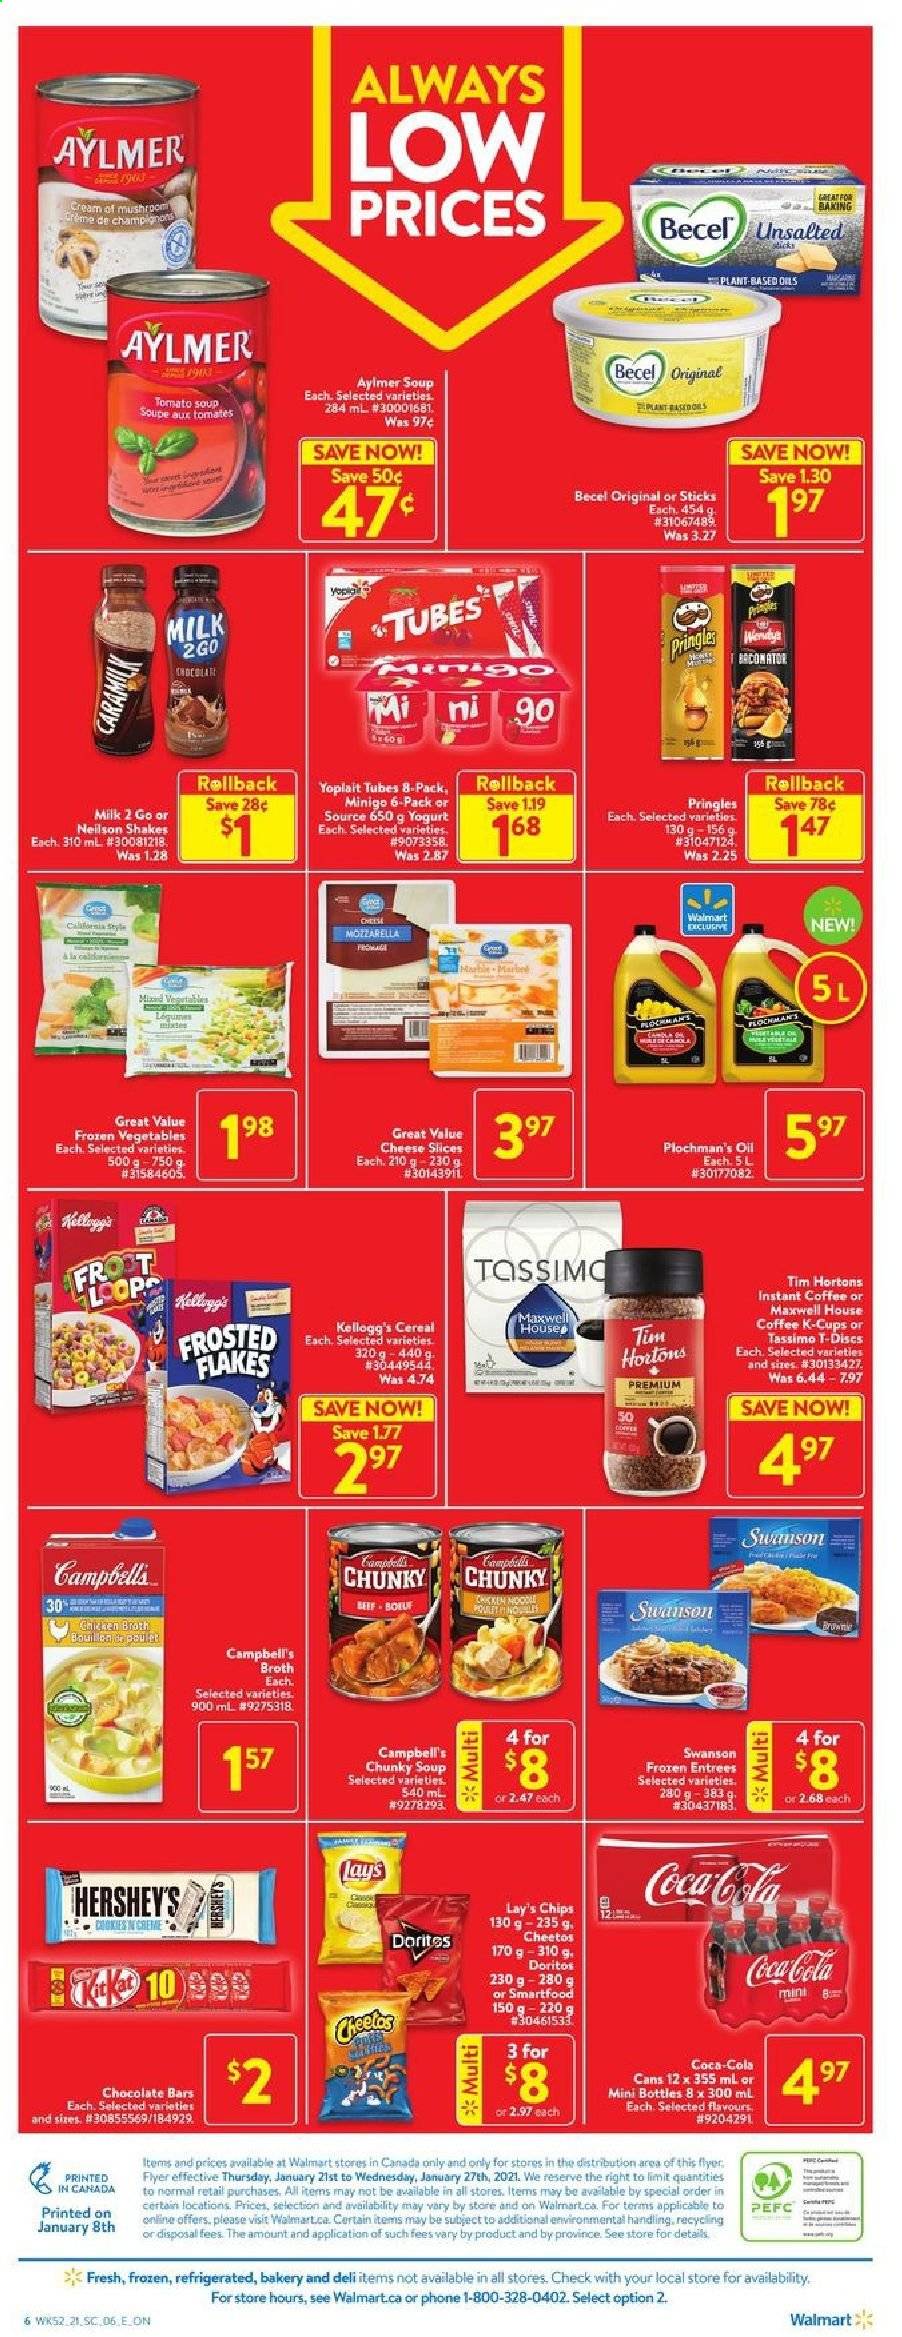 thumbnail - Walmart Flyer - January 21, 2021 - January 27, 2021 - Sales products - Campbell's, tomato soup, soup, sliced cheese, cheese, yoghurt, Yoplait, milk, shake, Hershey's, frozen vegetables, Kellogg's, chocolate bar, Doritos, Pringles, Cheetos, Lay’s, Smartfood, broth, cereals, Frosted Flakes, oil, Coca-Cola, Maxwell House, instant coffee, coffee capsules, K-Cups, mozzarella. Page 3.